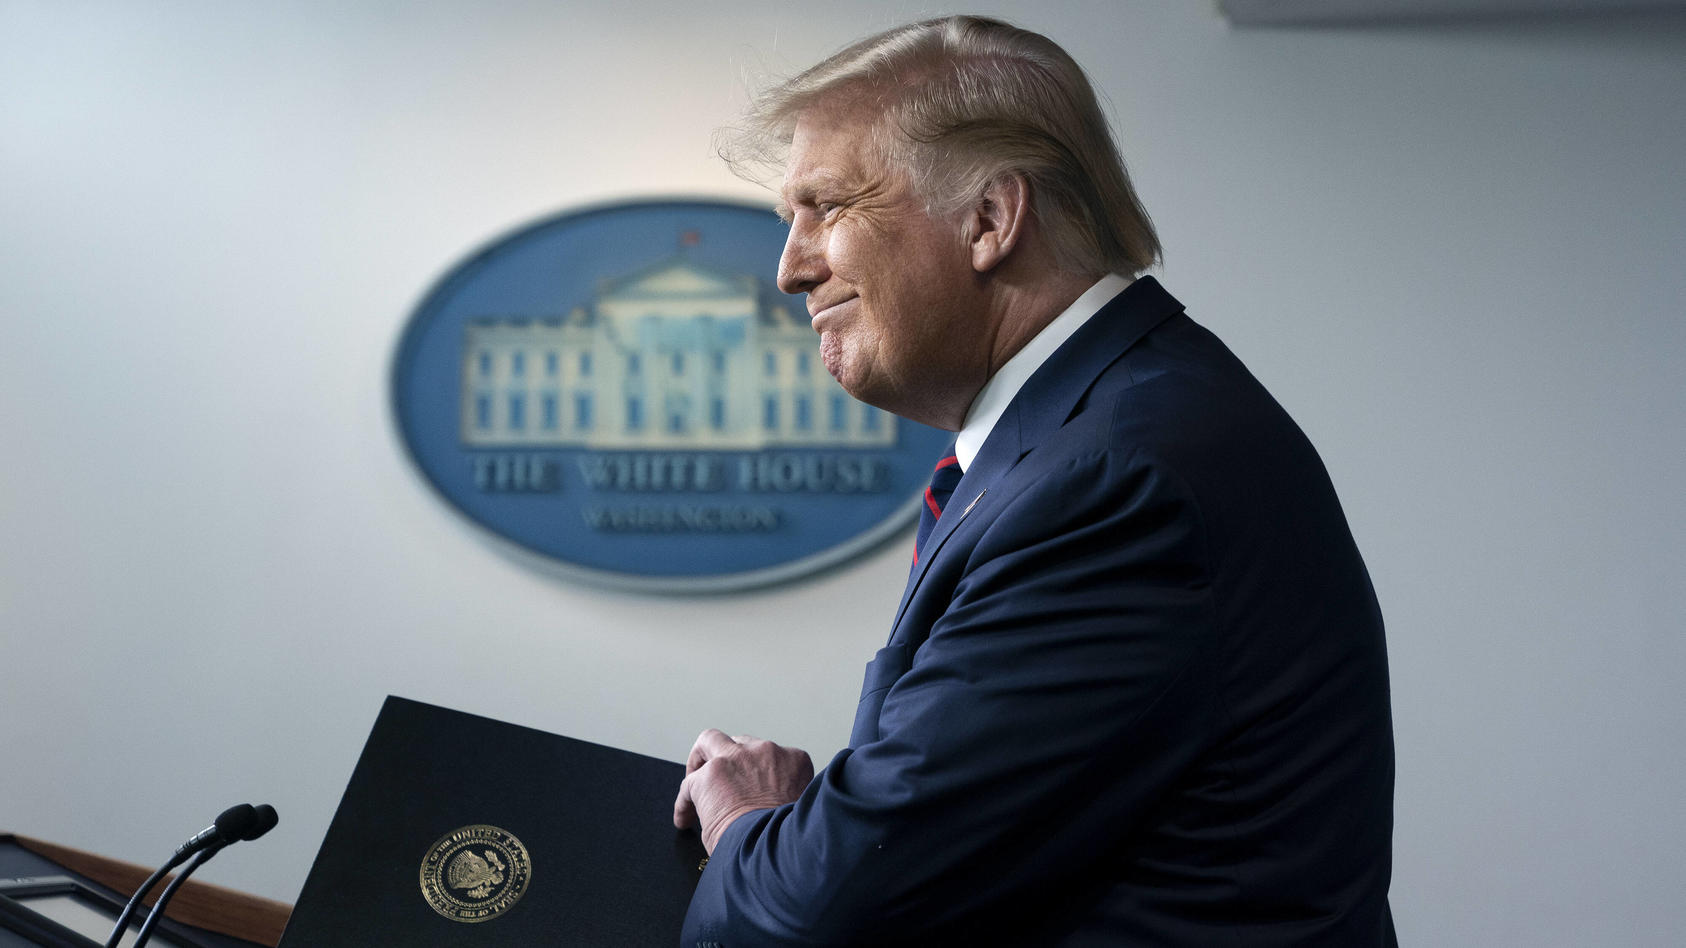 News Bilder des Tages United States President Donald J. Trump arrives to a news conference in the James S. Brady Press Briefing Room at the White House in Washington D.C., U.S., on Sunday, August 23, 2020. Trump announced that a new treatment for COV